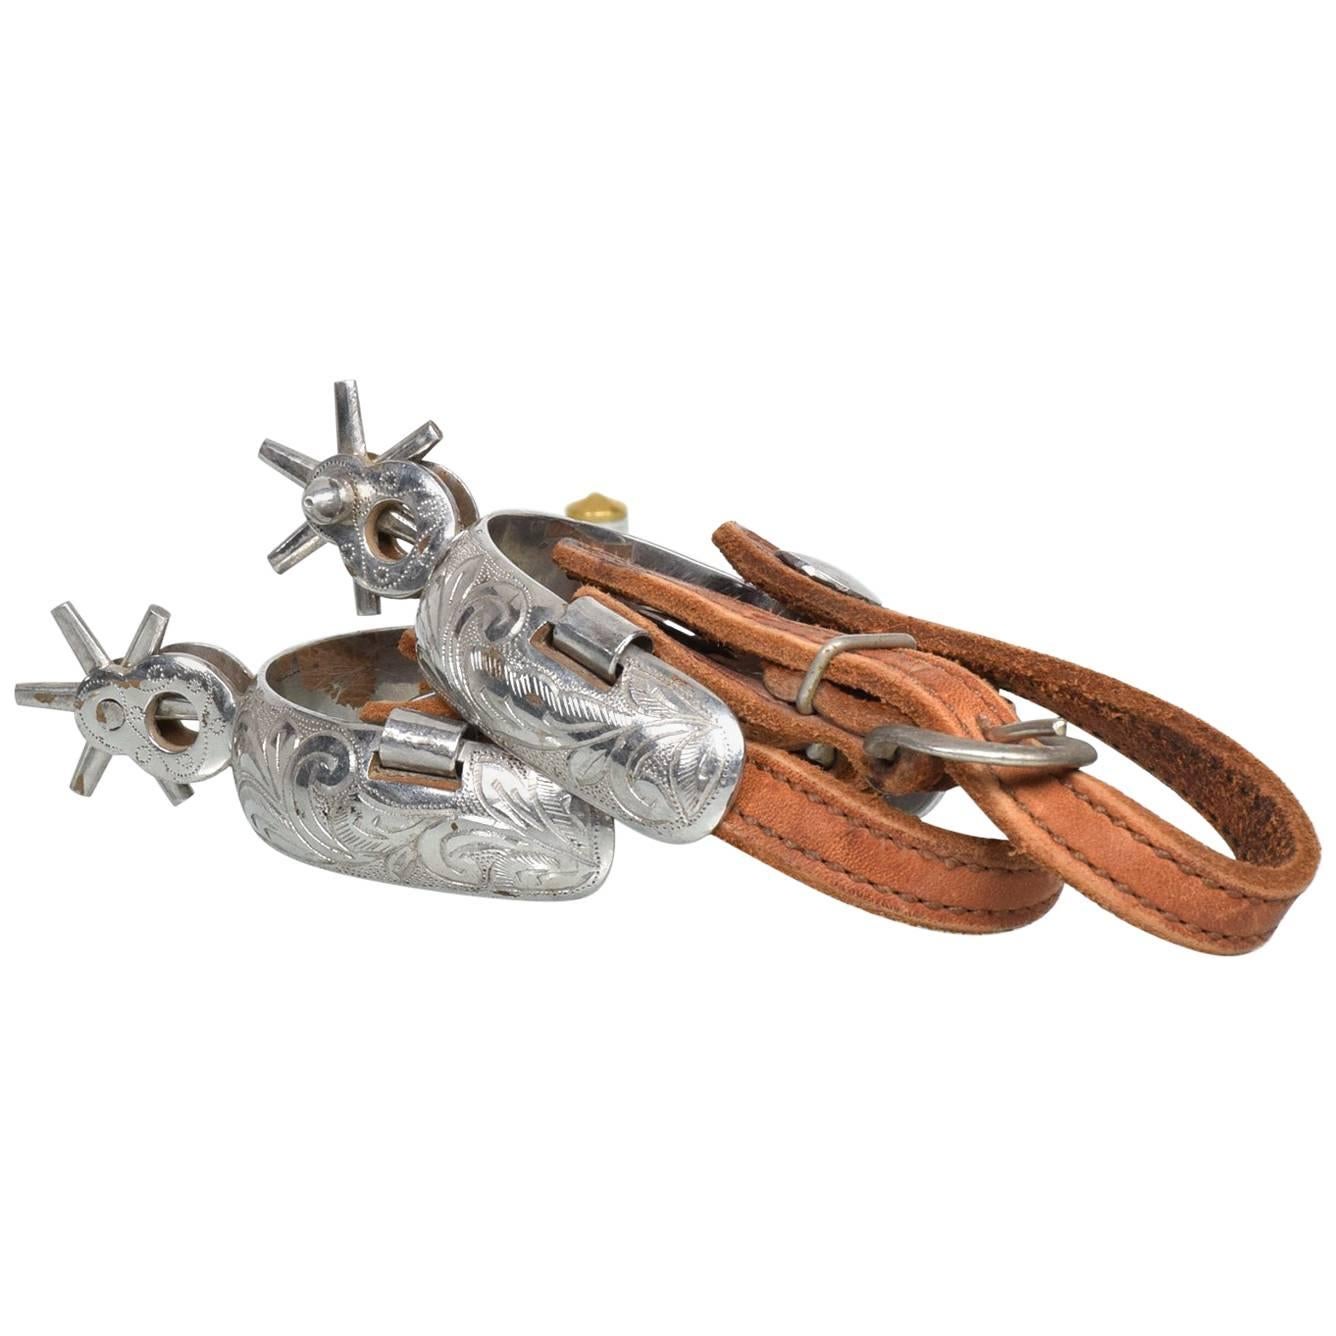 Pair of Vintage Spurs with Saddle Leather Straps